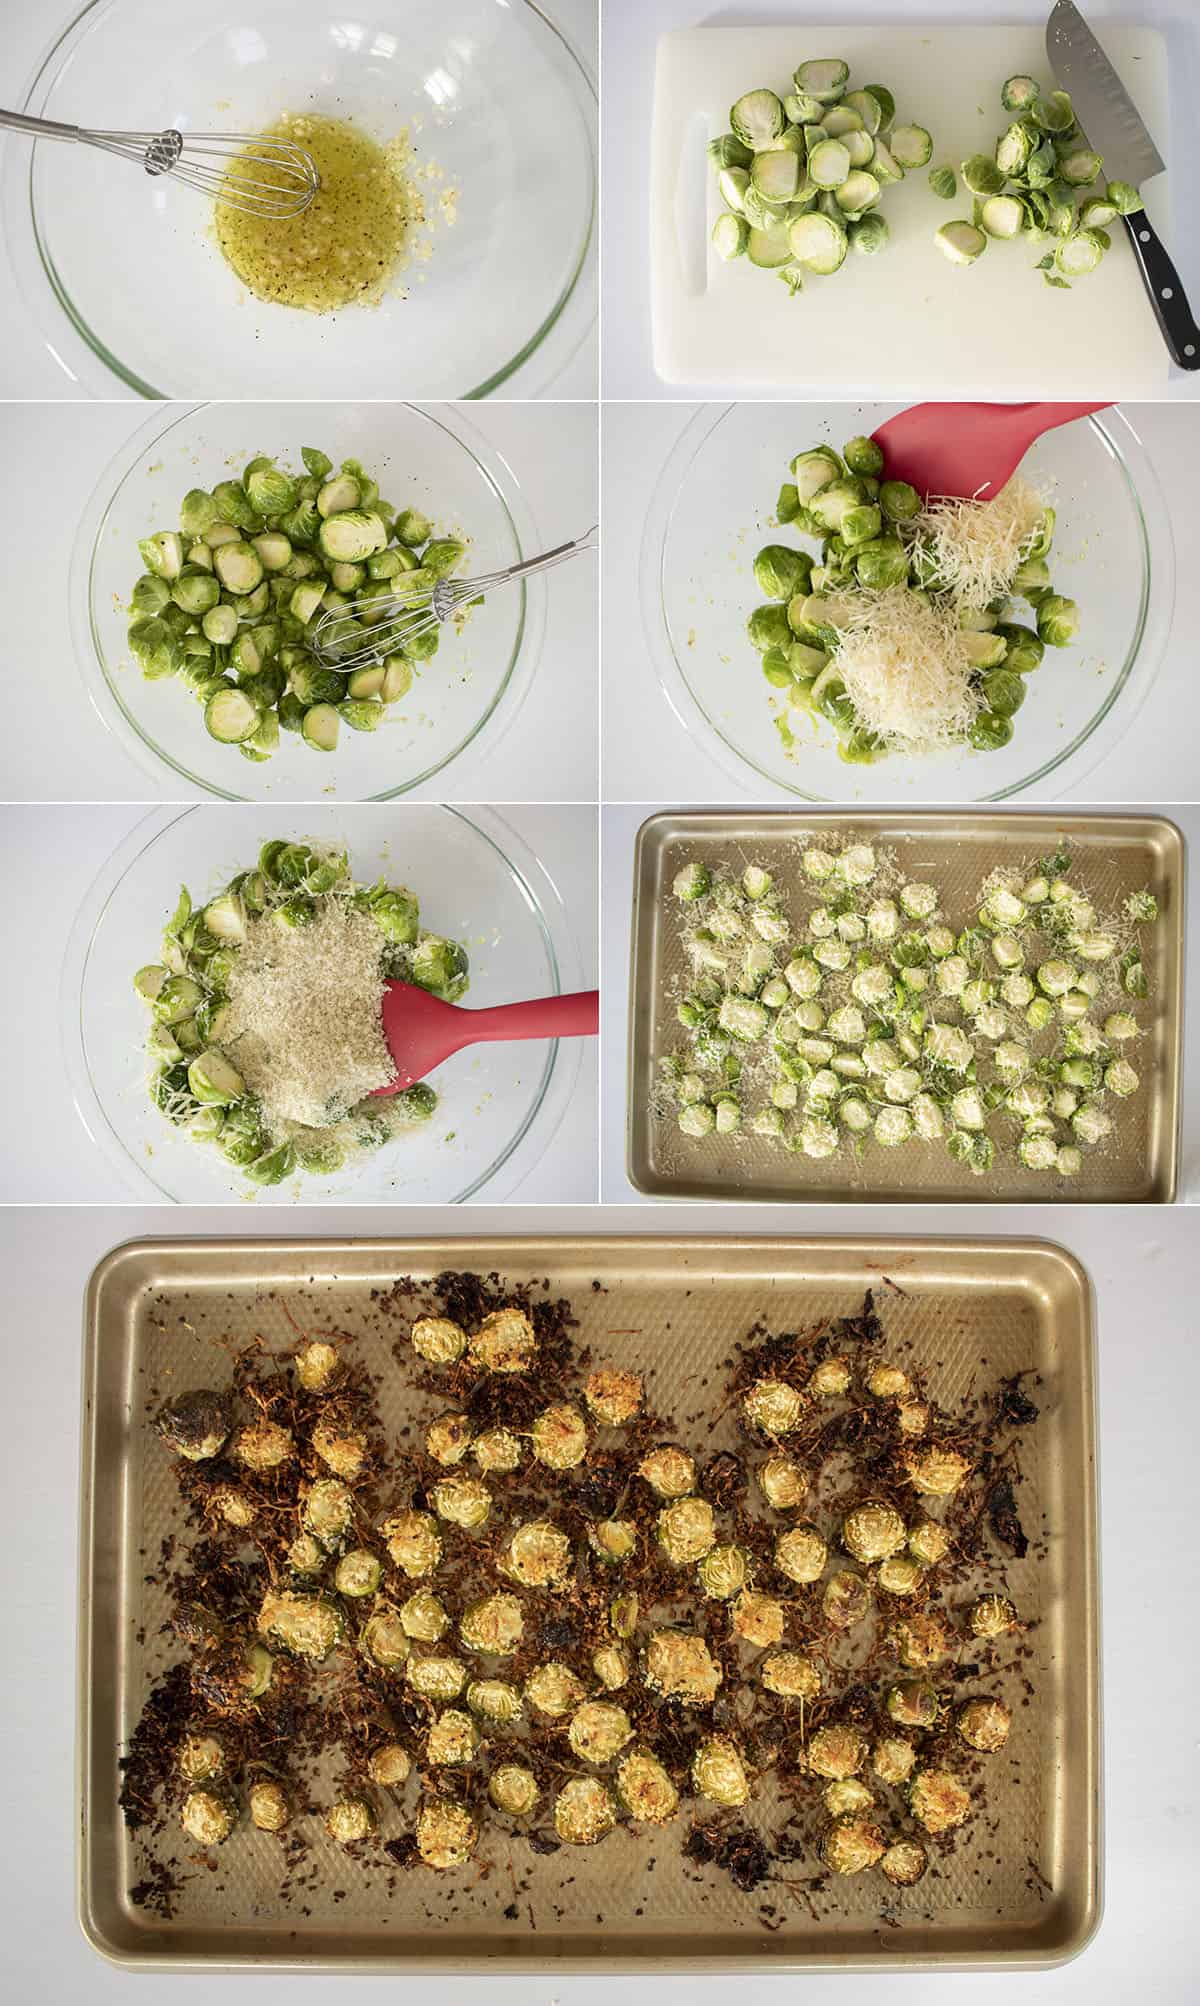 Process of making Parmesan Brussel Sprouts